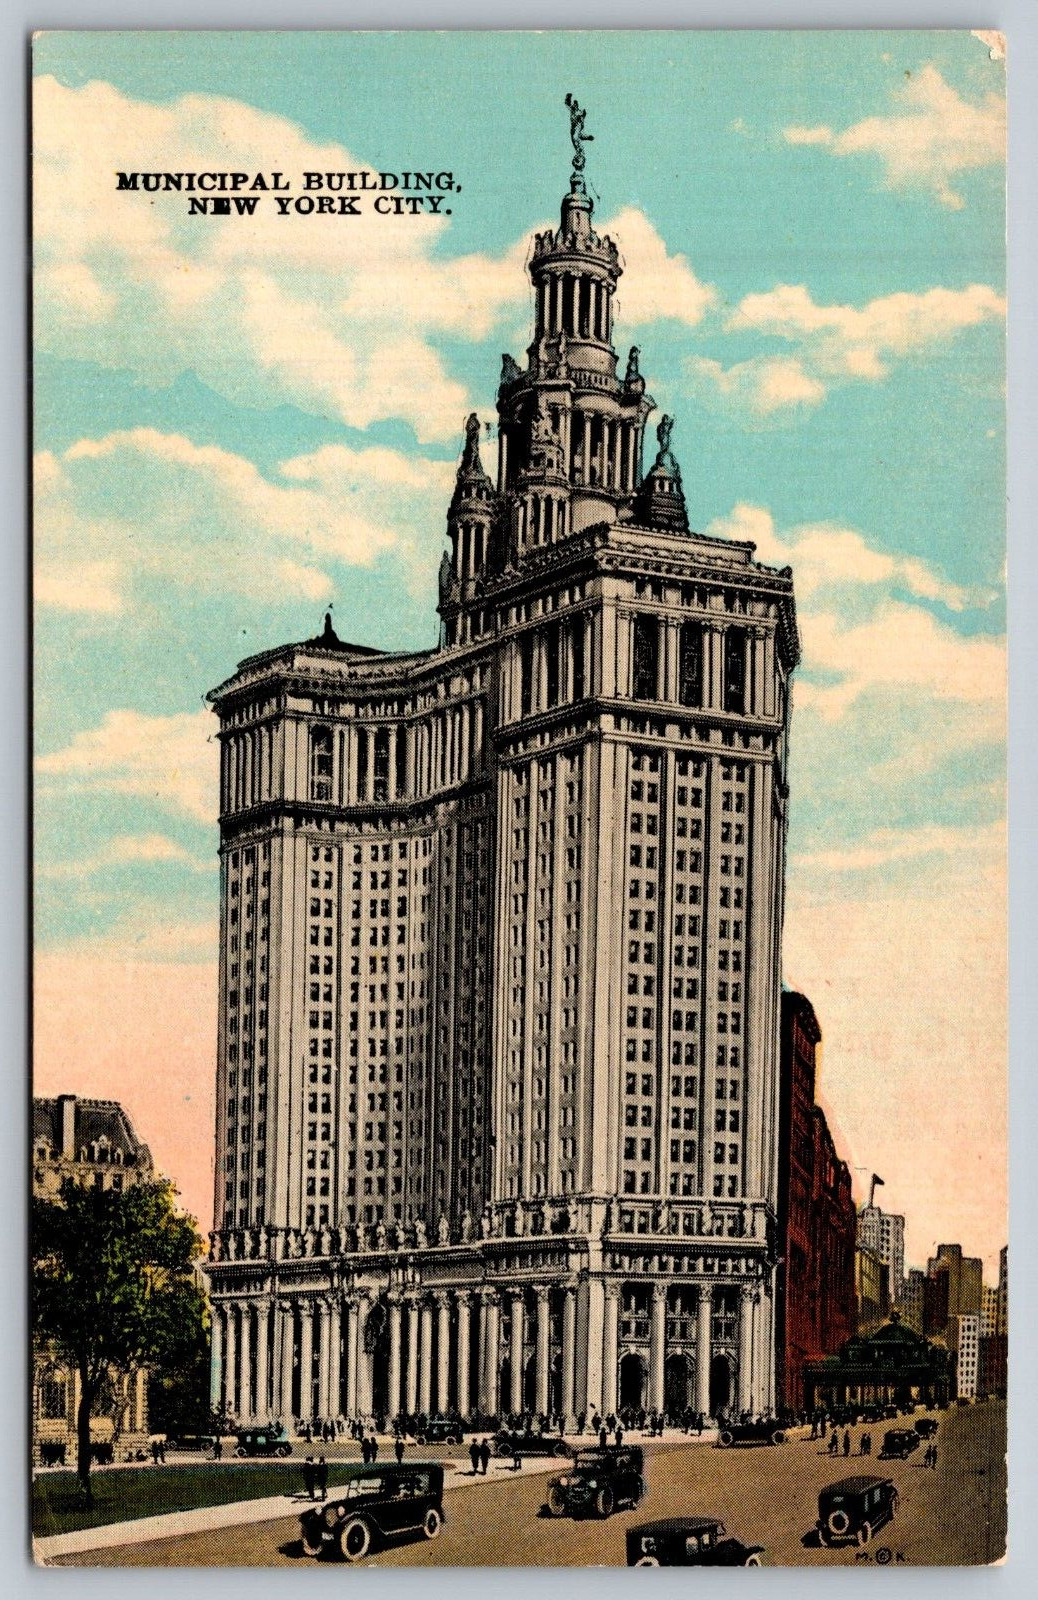 Vtg Early 1900s -Municipal Building, New York City, NY Postcard (UnPosted)